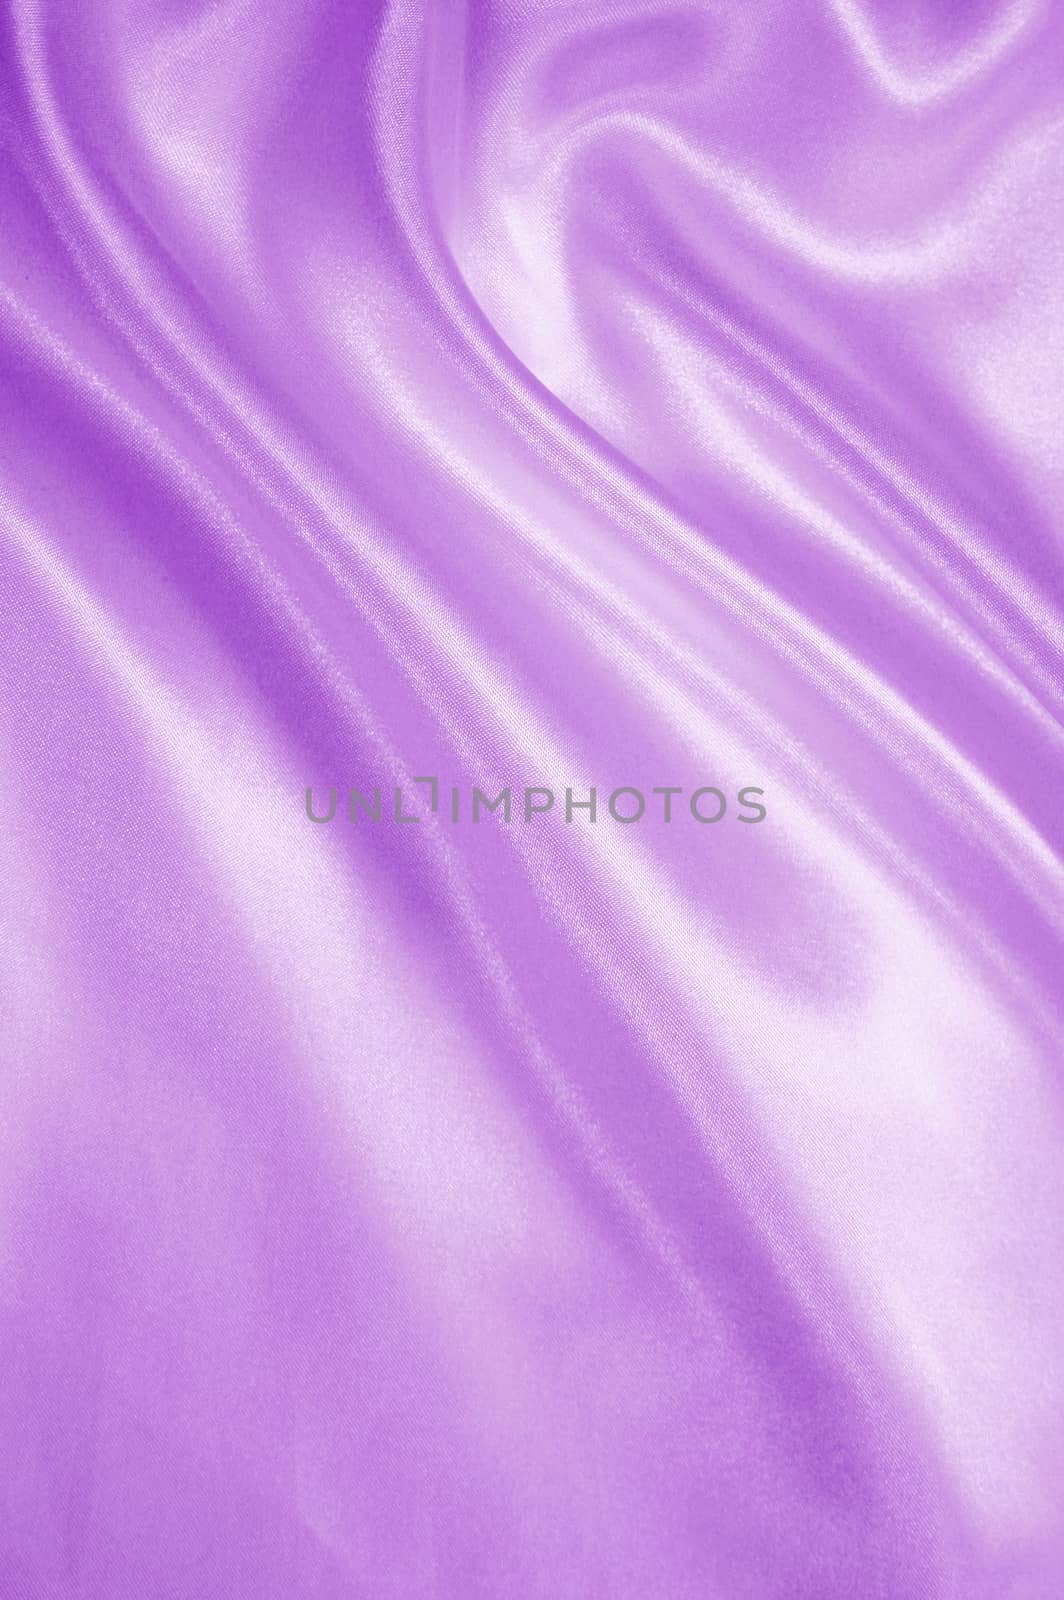 Smooth elegant lilac silk or satin as background  by oxanatravel